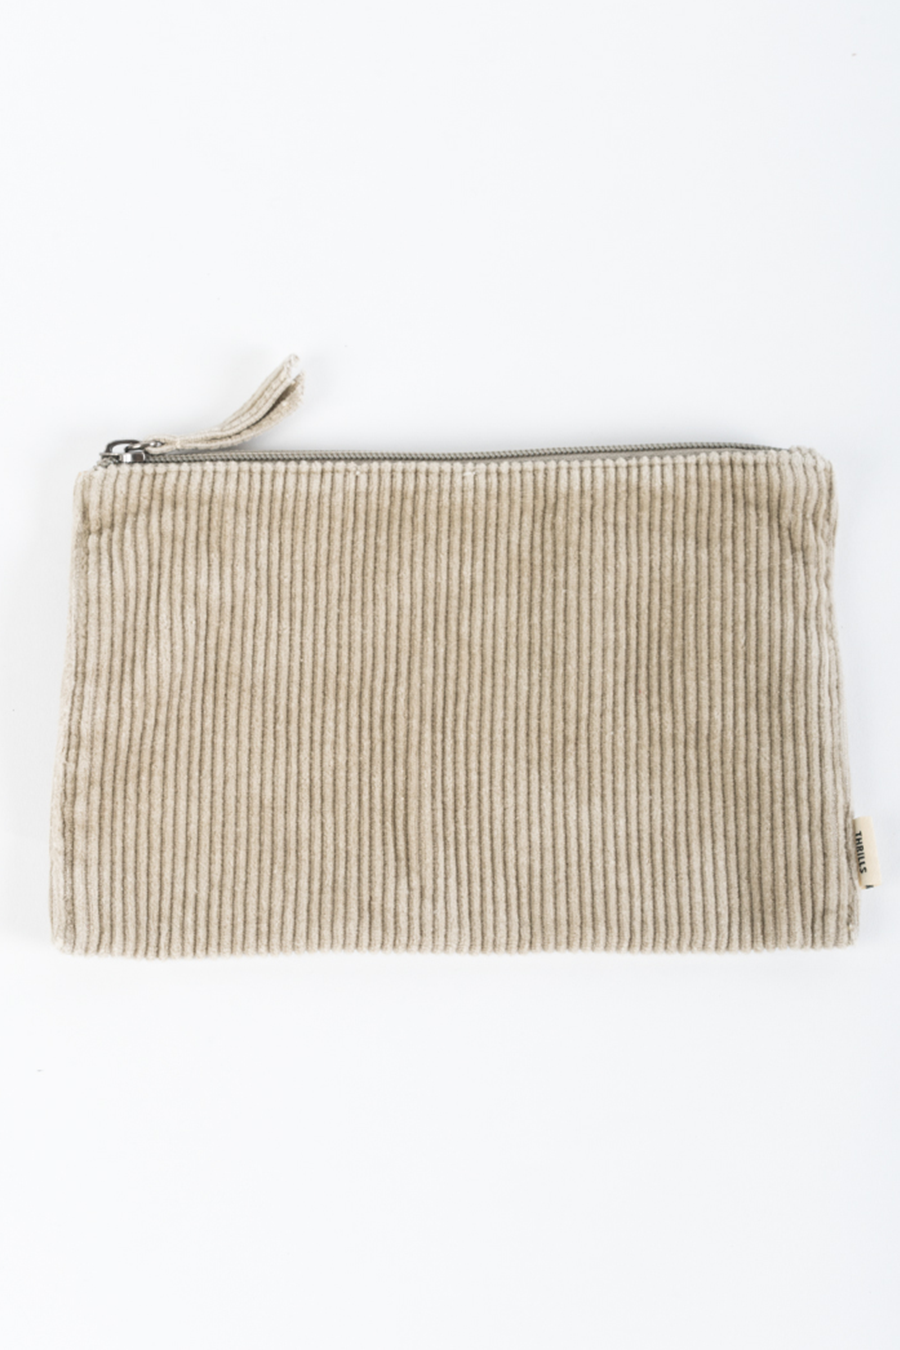 Canyon Cord Pouch | Dusty Sage - Main Image Number 1 of 1